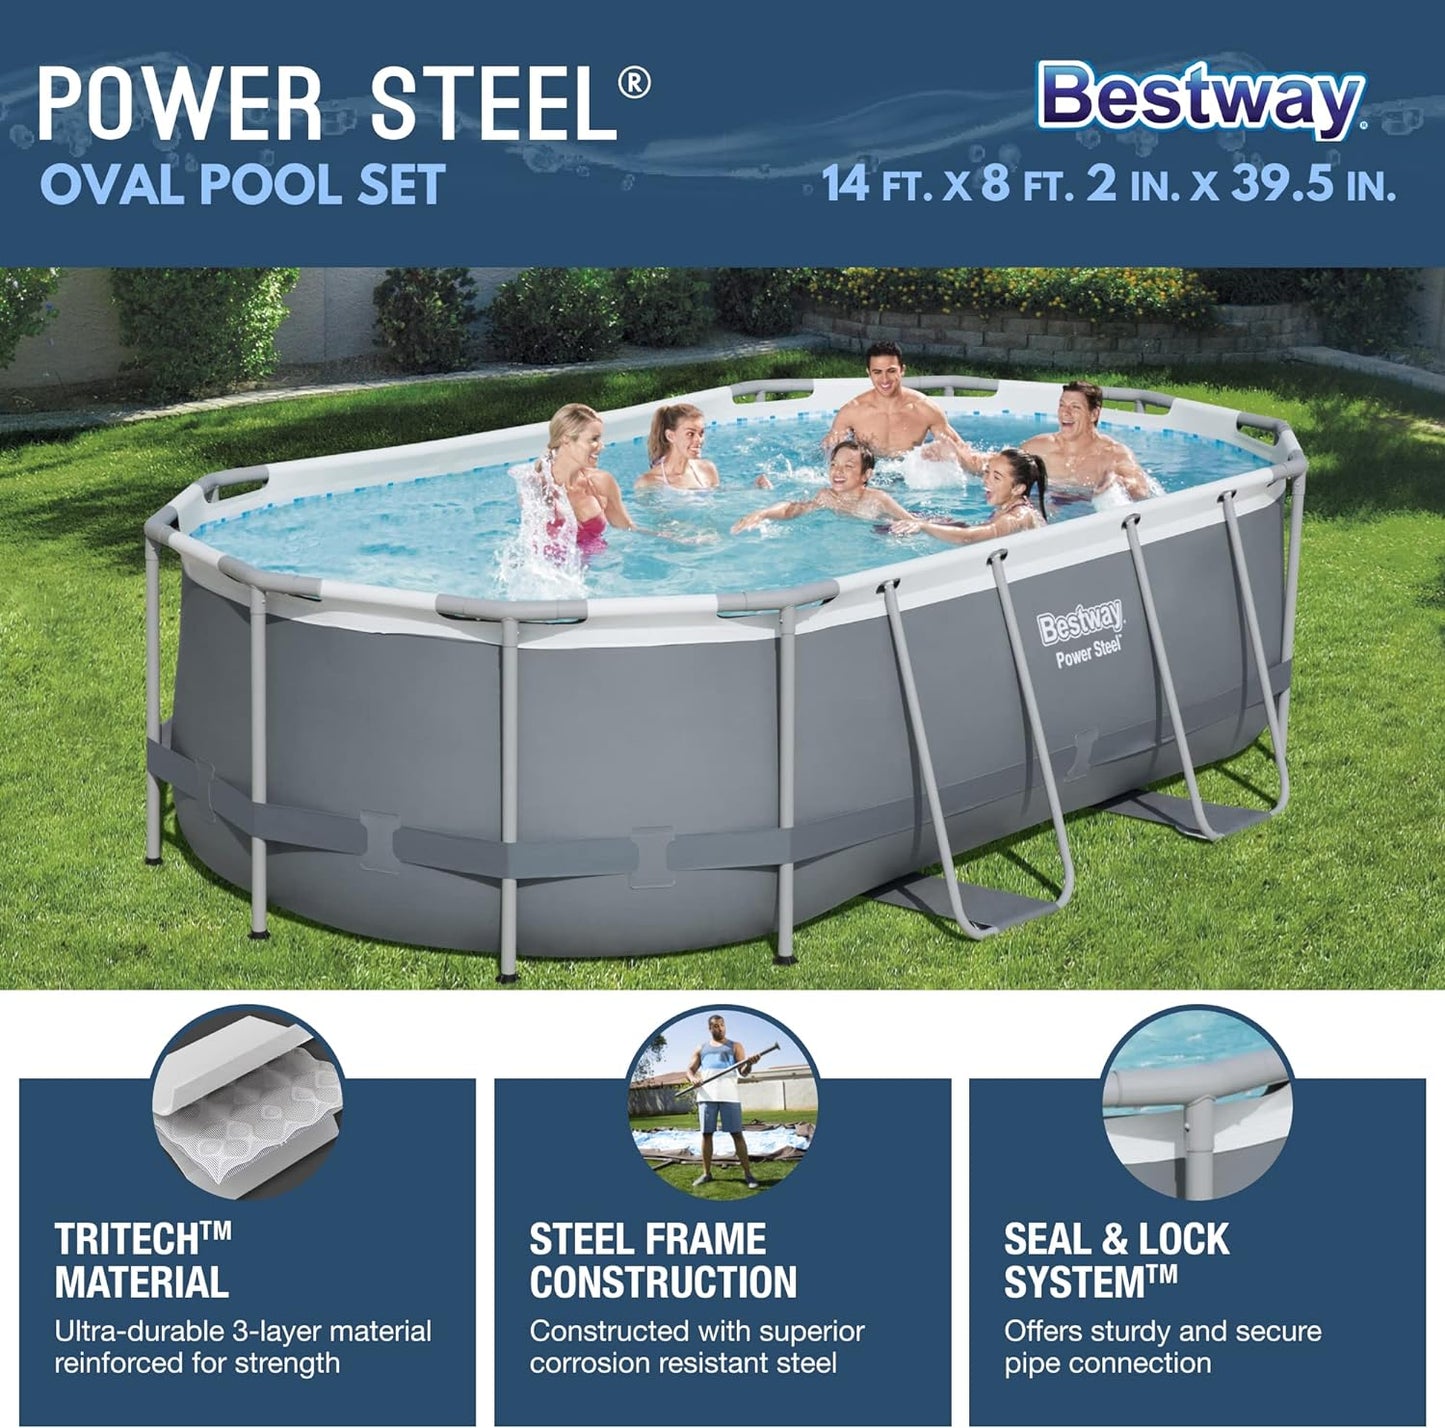 NEW IN BOX - Bestway Power Steel 14' x 8'2" x 39.5" Oval Above Ground Pool Set | Includes 530gal Filter Pump, Ladder, ChemConnect Dispener - Retail $478